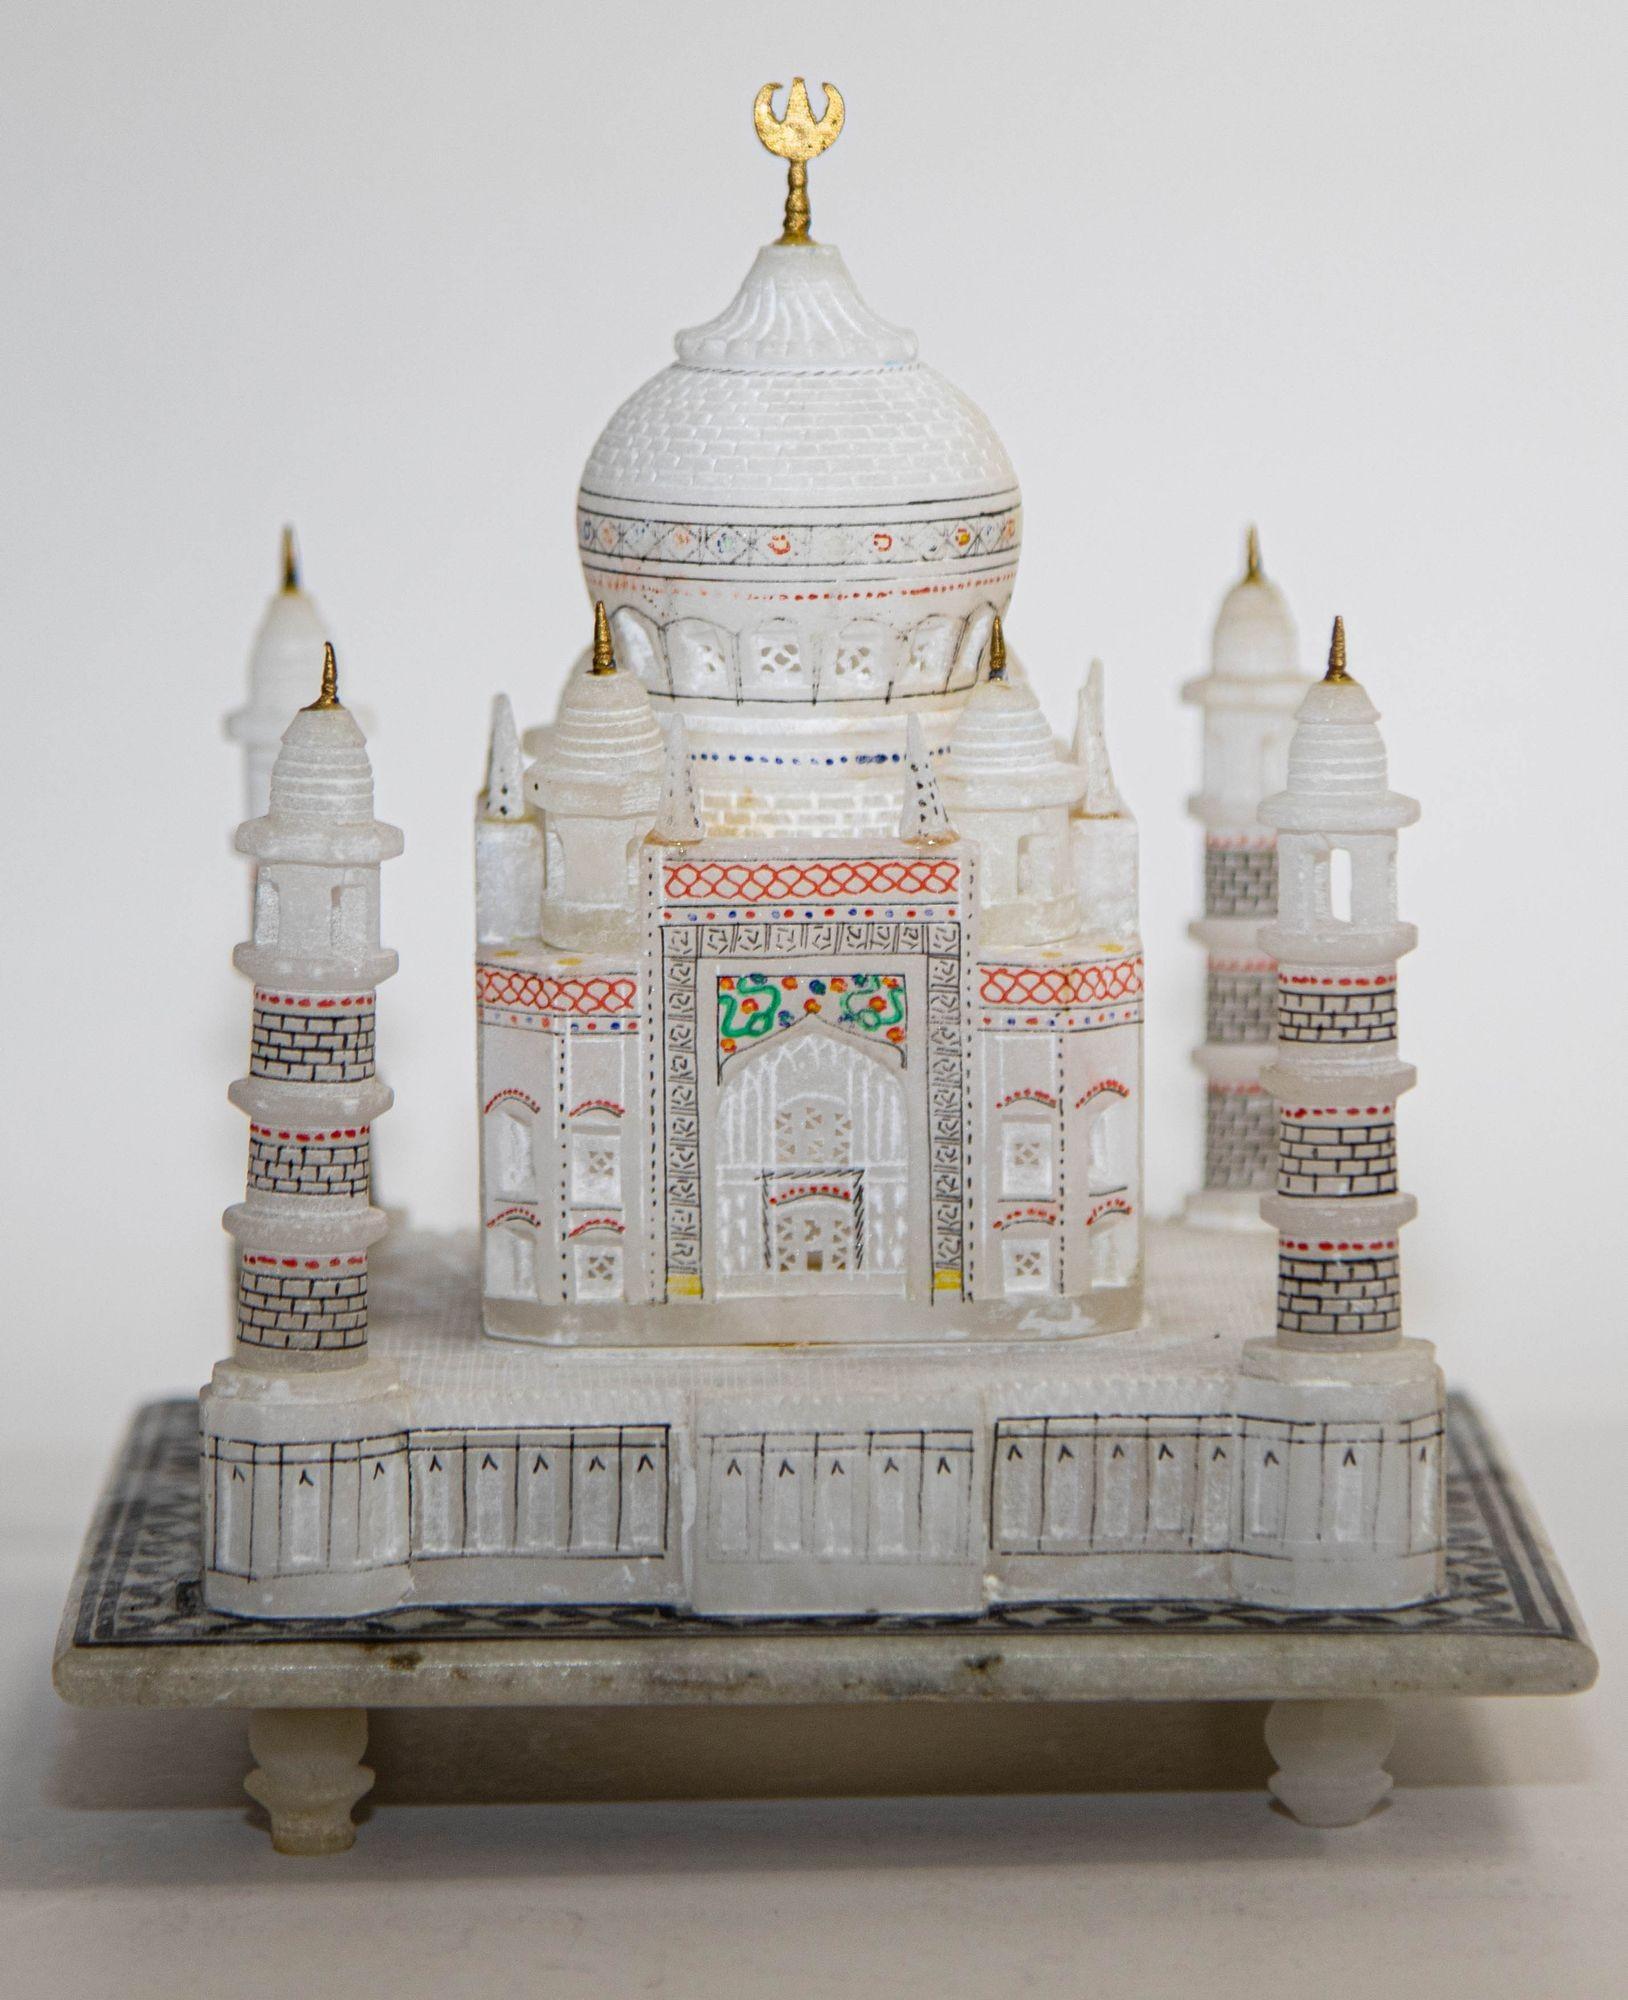 Vintage Taj Mahal white marble hand-crafted collectible architectural miniature model.
Handmade replica or miniature of the original Taj Mahal situated in India and popularly known as symbol of love.
A finely Taj Mahal replica hand-made from white